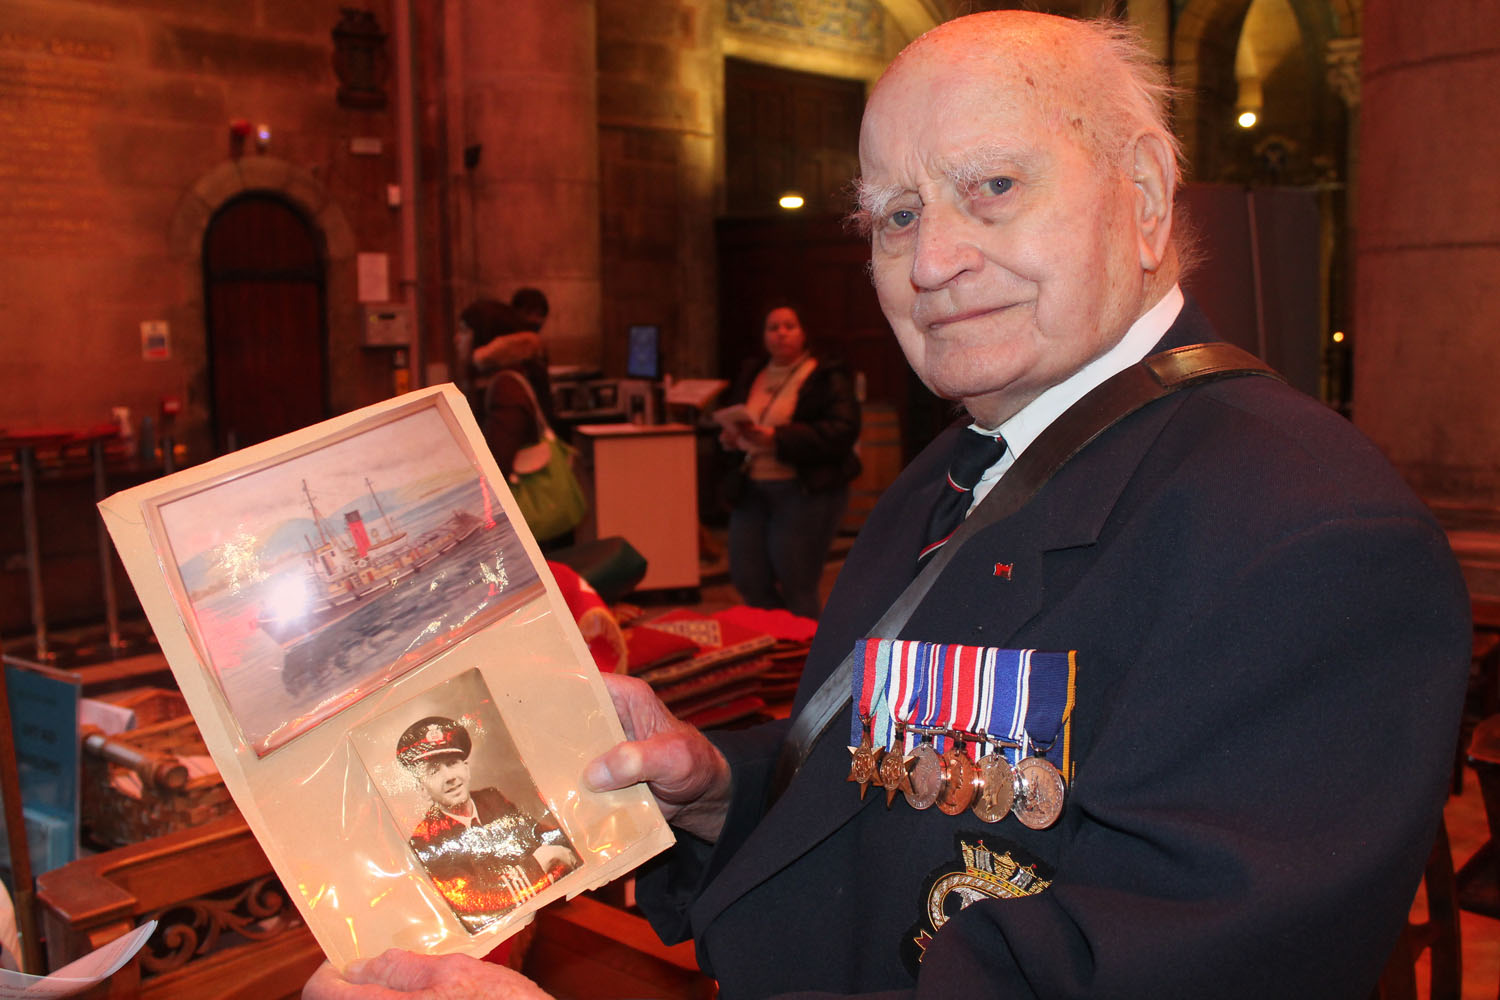 John Coulter, 95, with pictures of the Empire Meadow tug boat on which he served in 1953, and its Master.